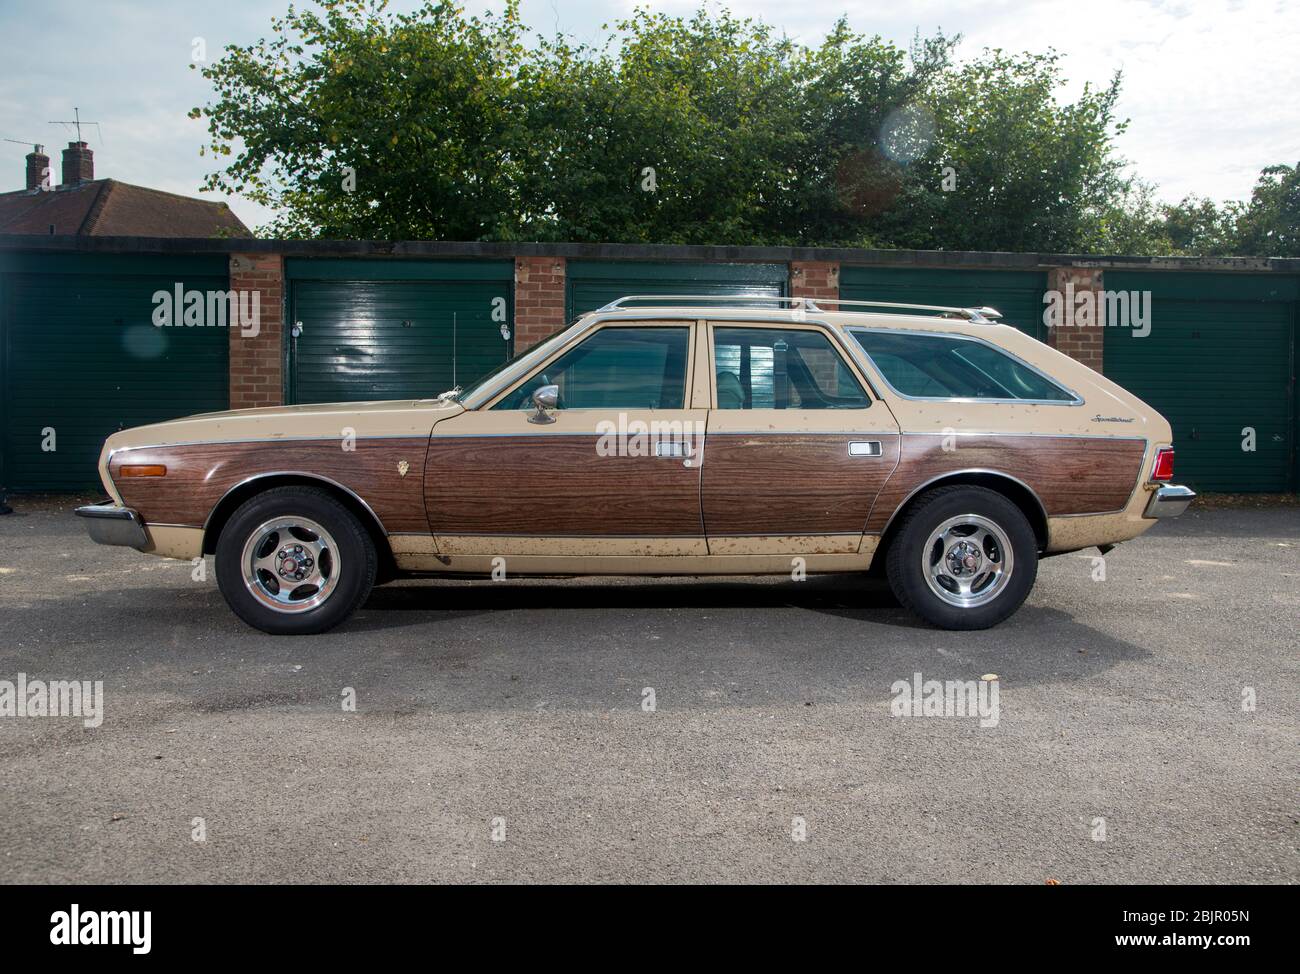 1973 AMC Hornet 'Gucci' special edition classic American station wagon car  Stock Photo - Alamy